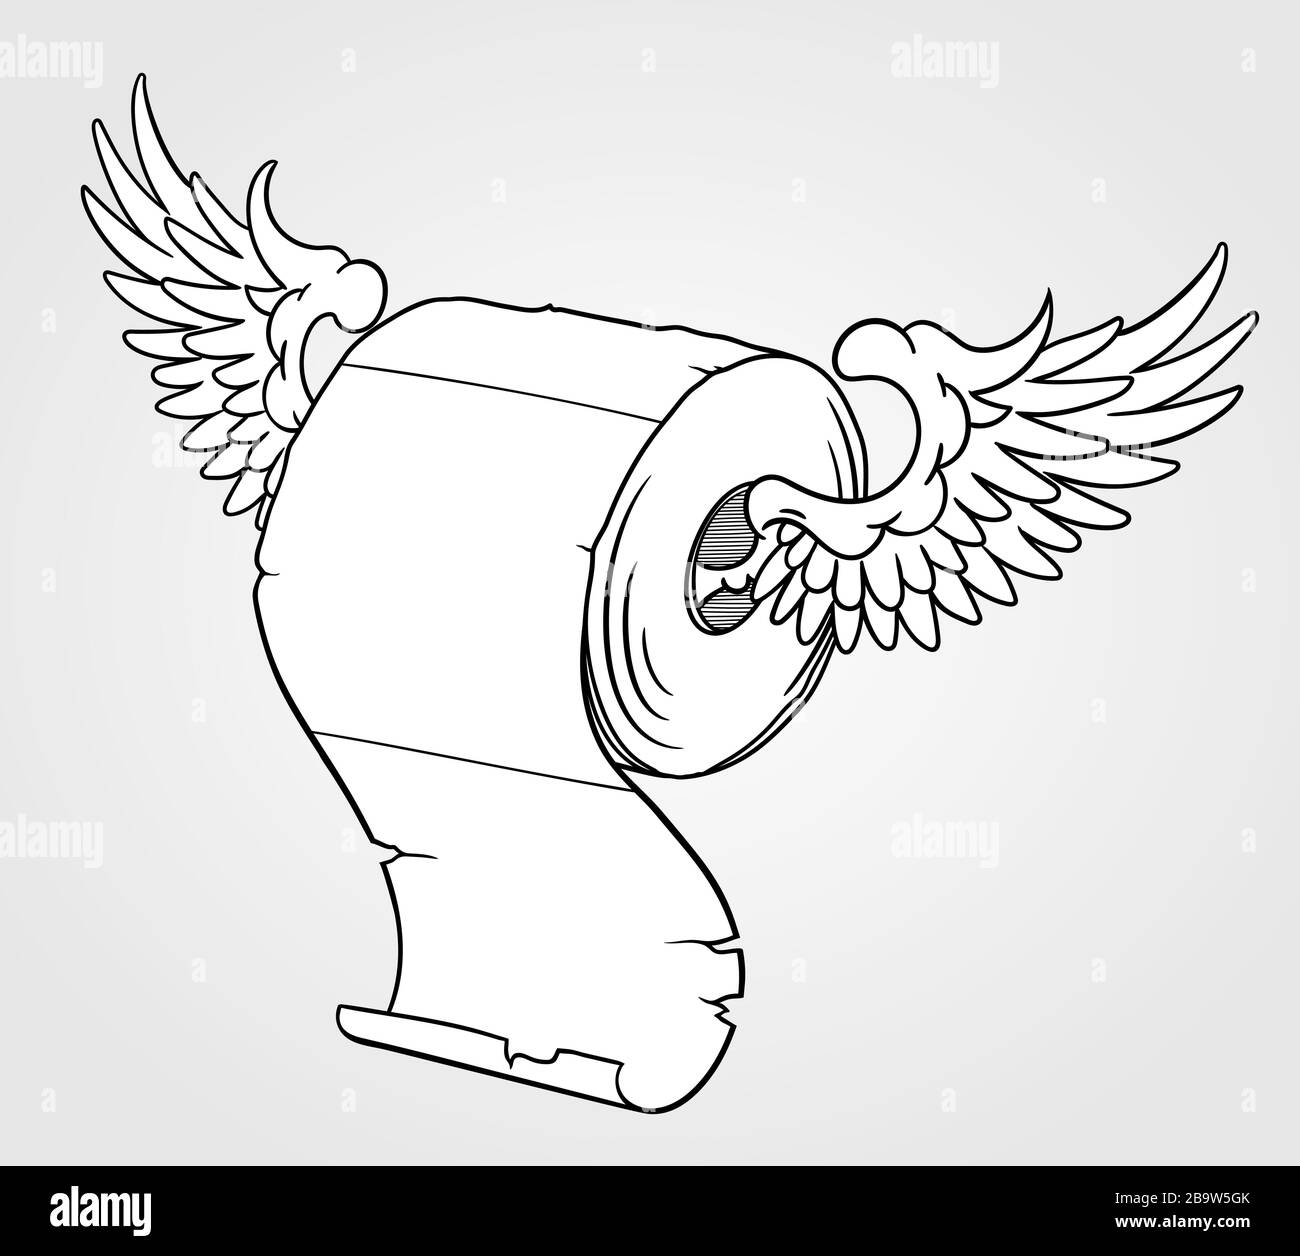 roll of toilet paper flying on the wings, hand drawn vector illustration about the world quarantine and buying deficite hygiene and sanitary items Stock Vector